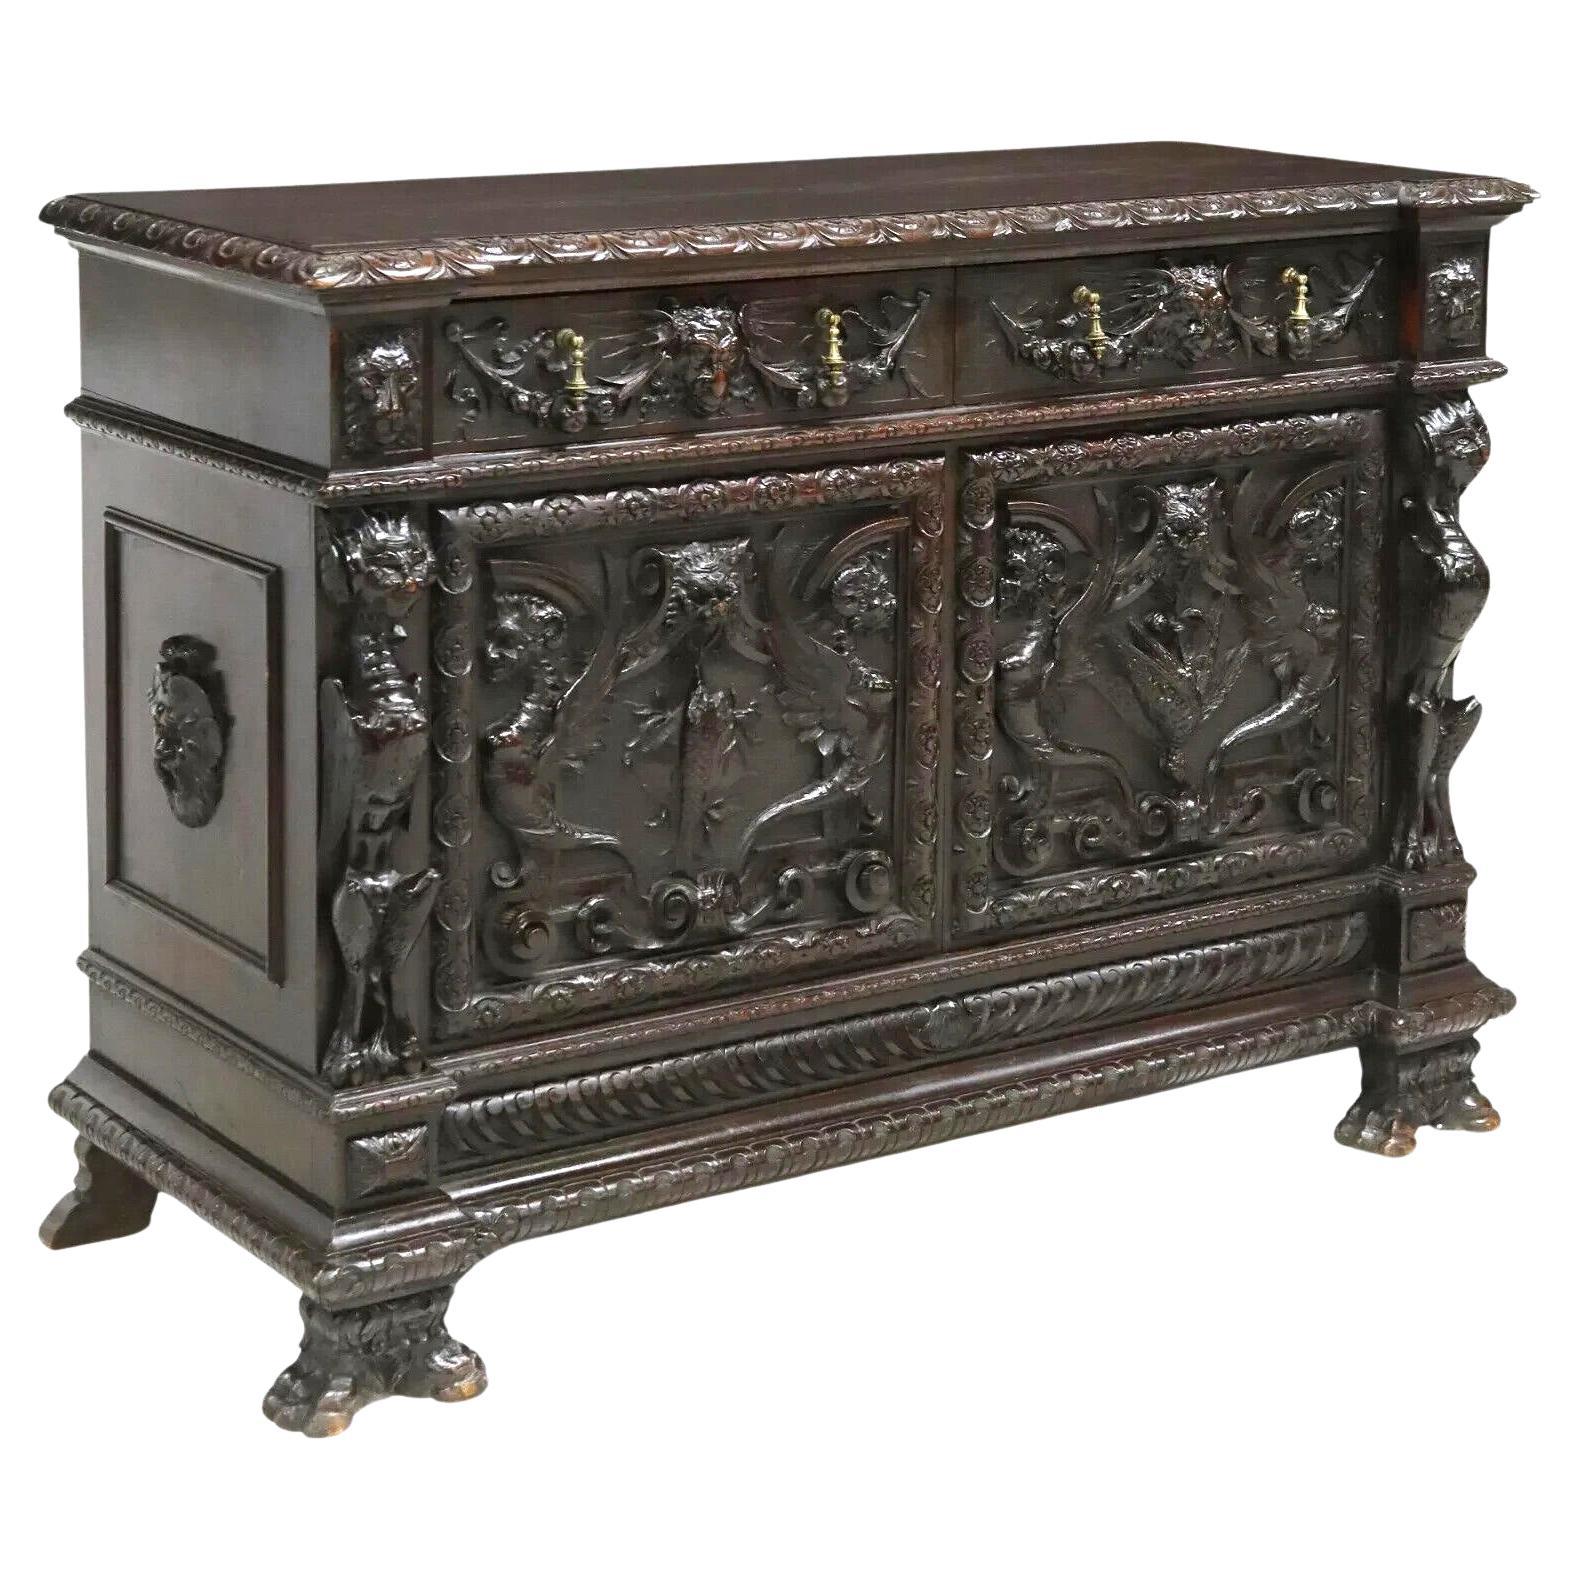 1800's Antique Carved, Italian Renaissance Revival, with Lion Masks, Sideboard!